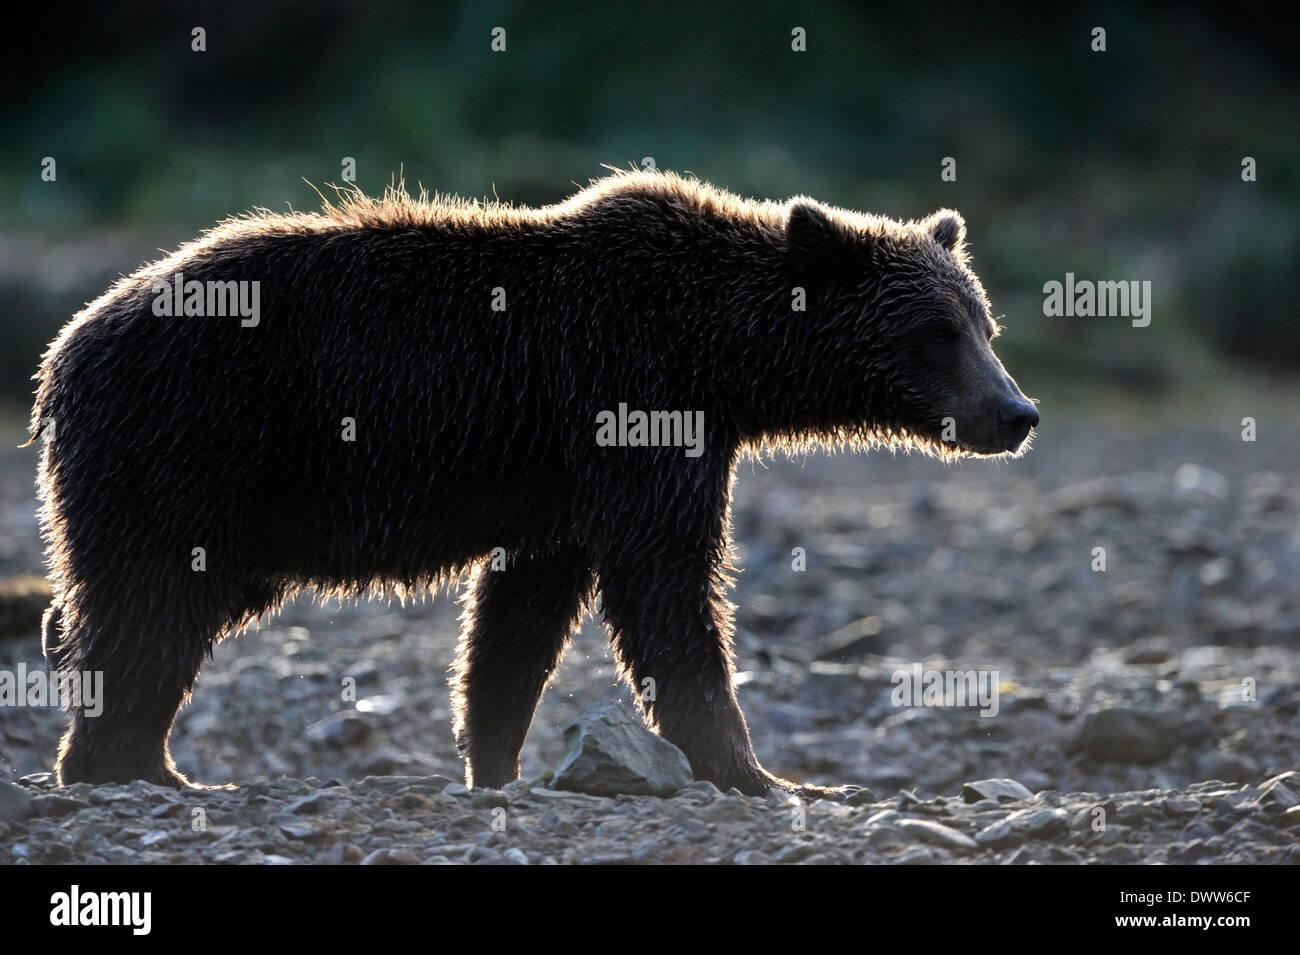 Grizzly bear (Ursus arctos horribilis) walking with back light at sunset. Stock Photo